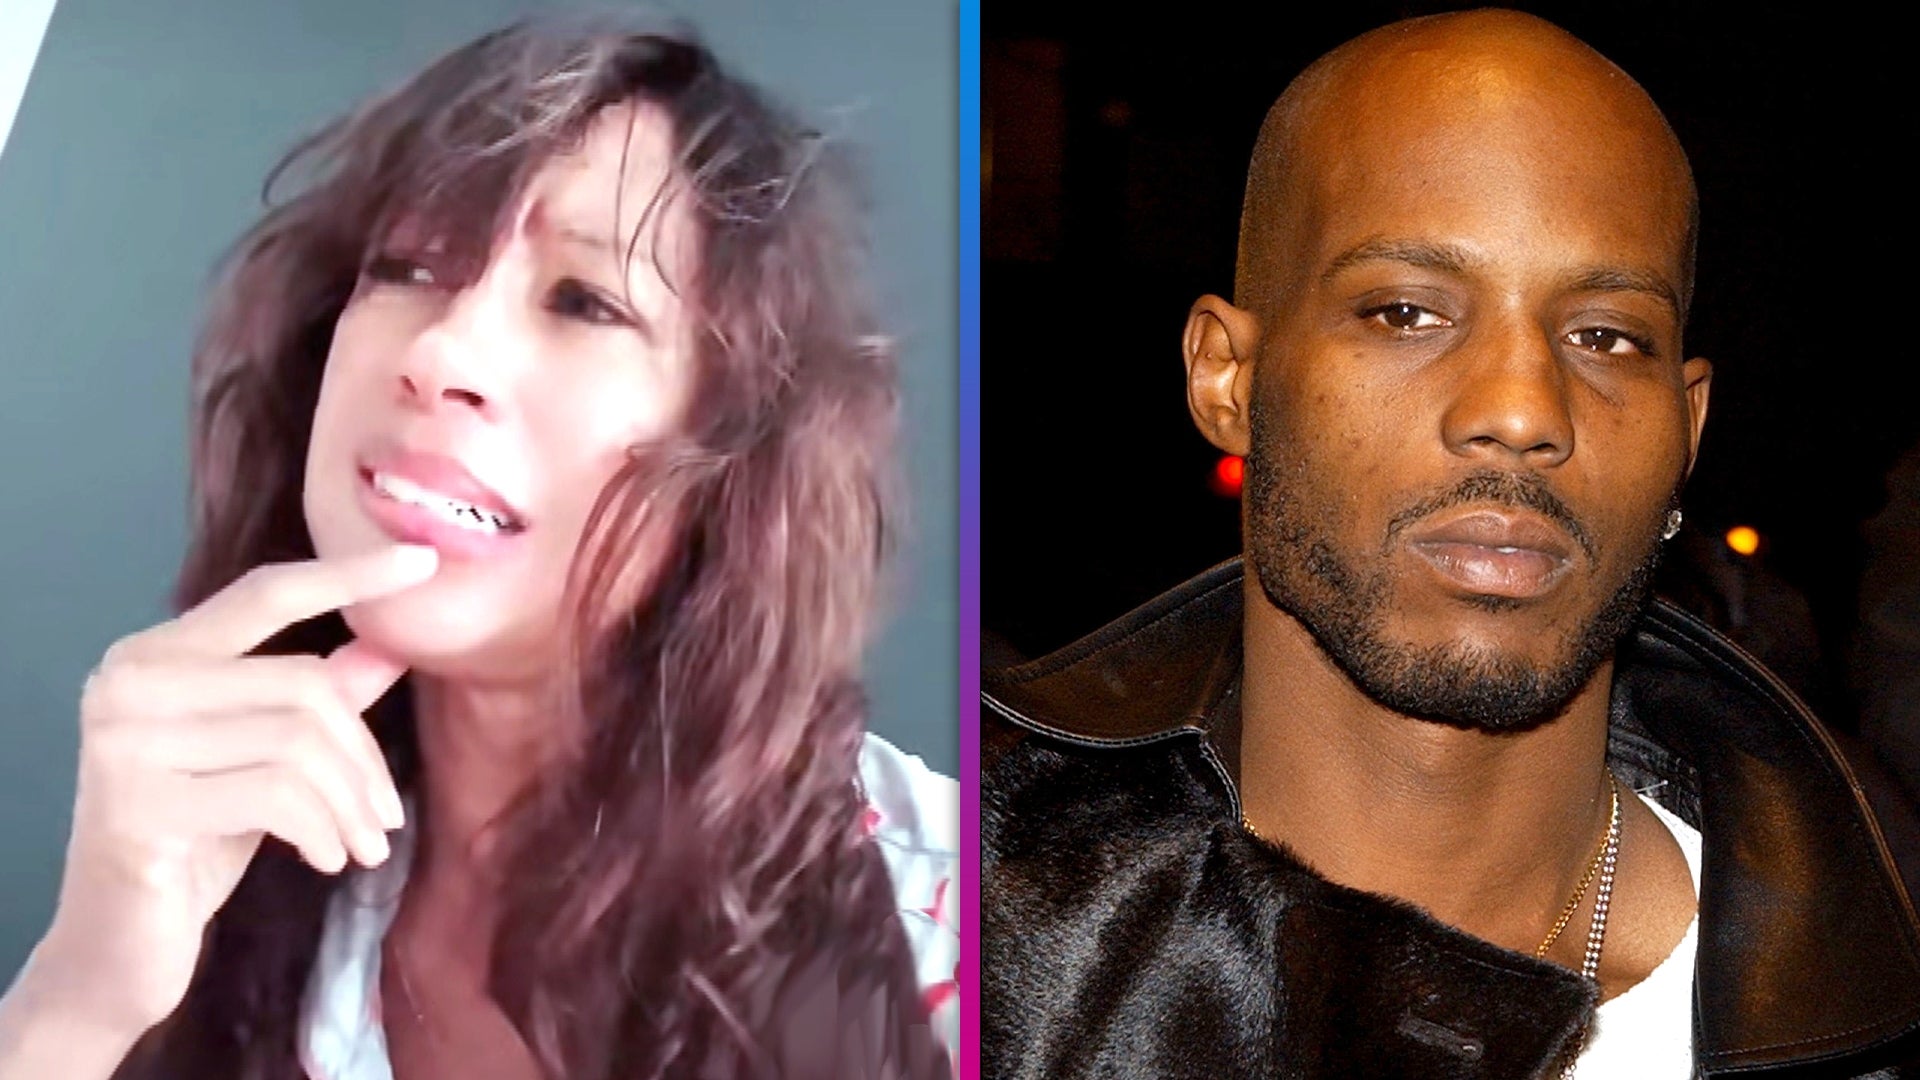 Stacey Dash Cries After Learning DMX Died Over a Year Ago 